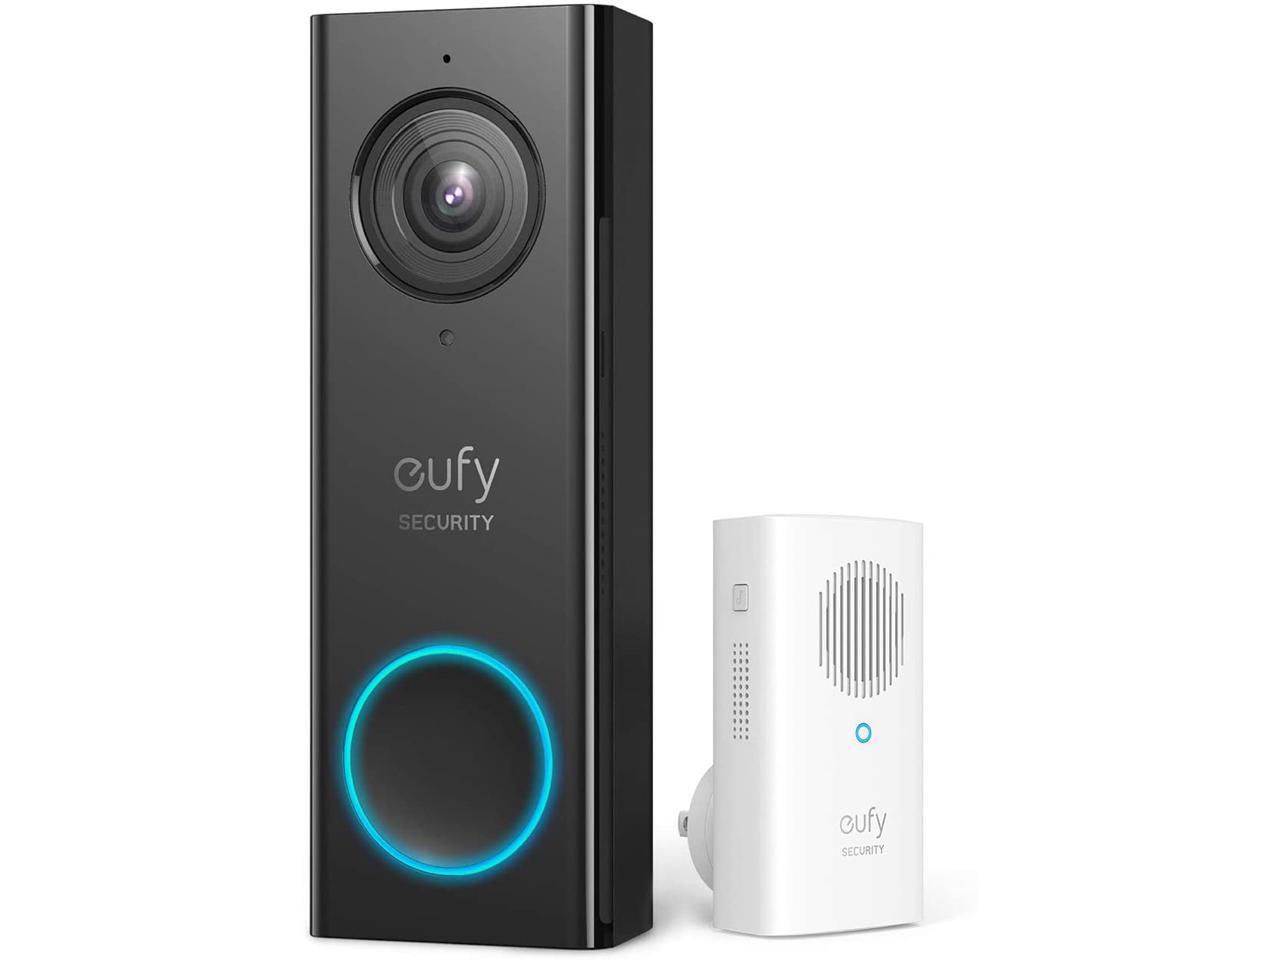 eufy Security Wi-Fi Video Doorbell, 2K Resolution *RFB* $65